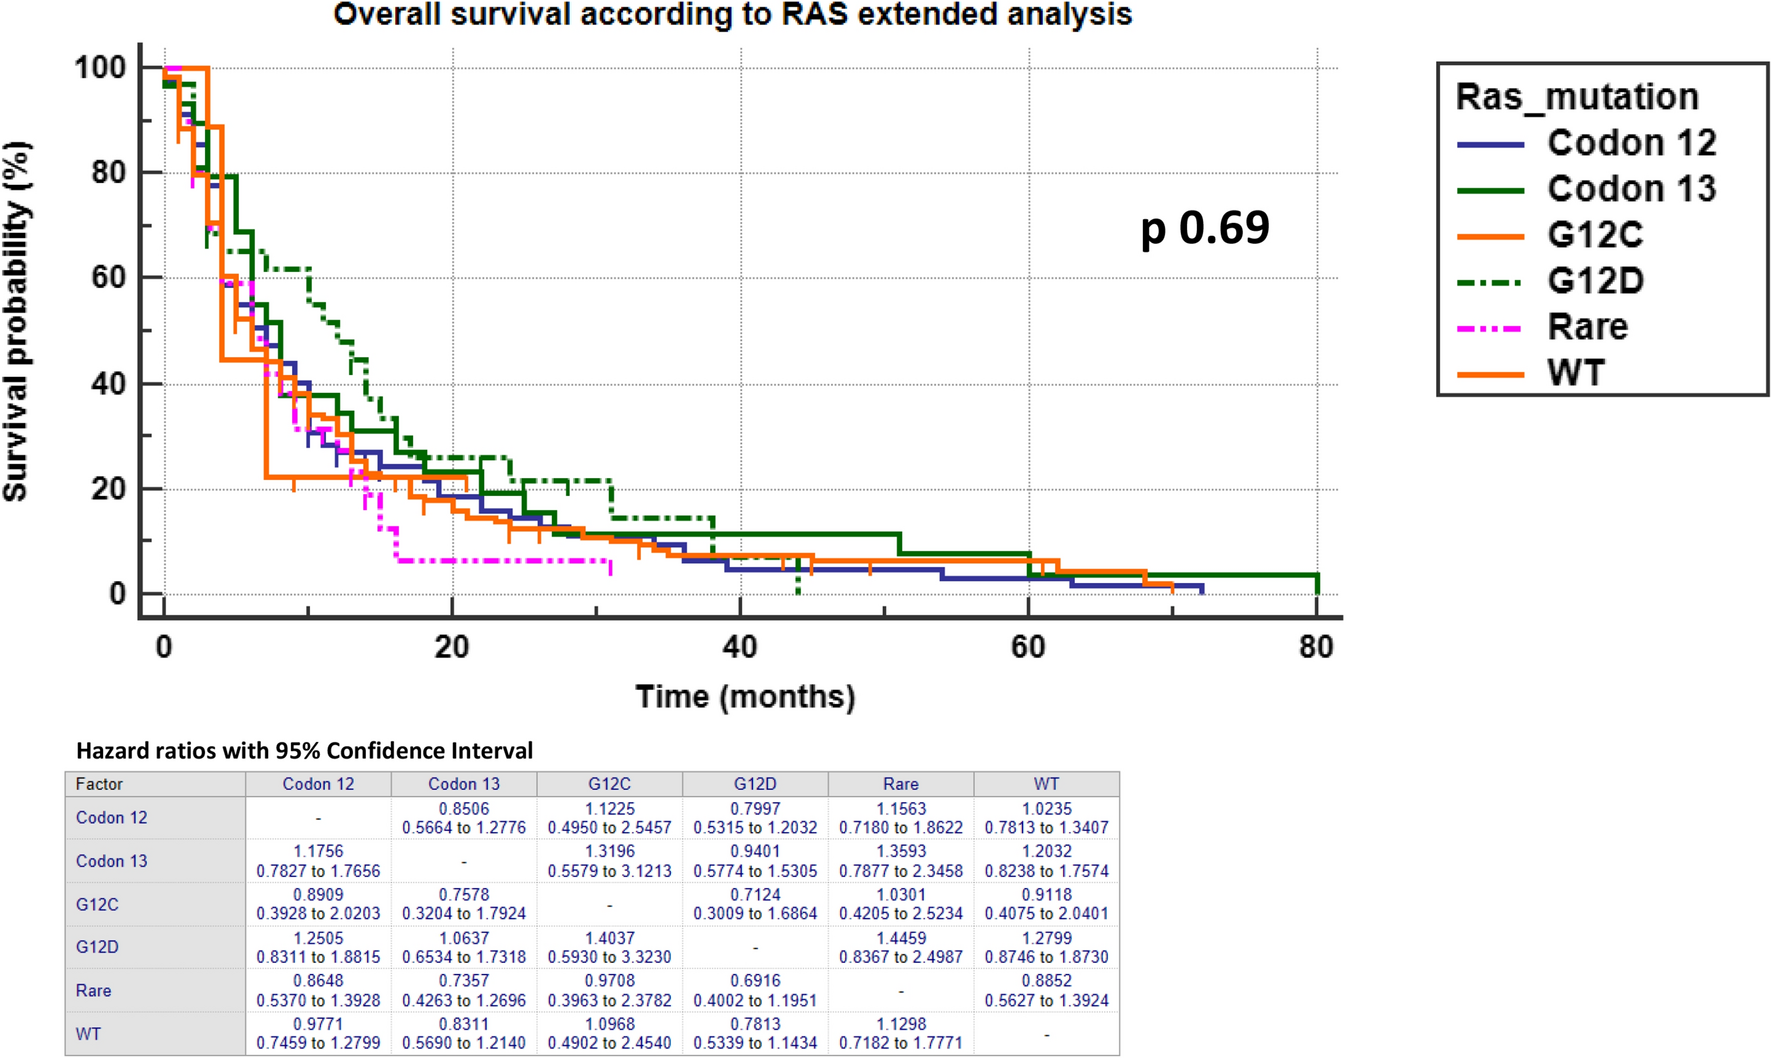 Efficacy of Regorafenib and Trifluridine/Tipiracil According to Extended RAS Evaluation in Advanced Metastatic Colorectal Cancer Patients: A Multicenter Retrospective Analysis